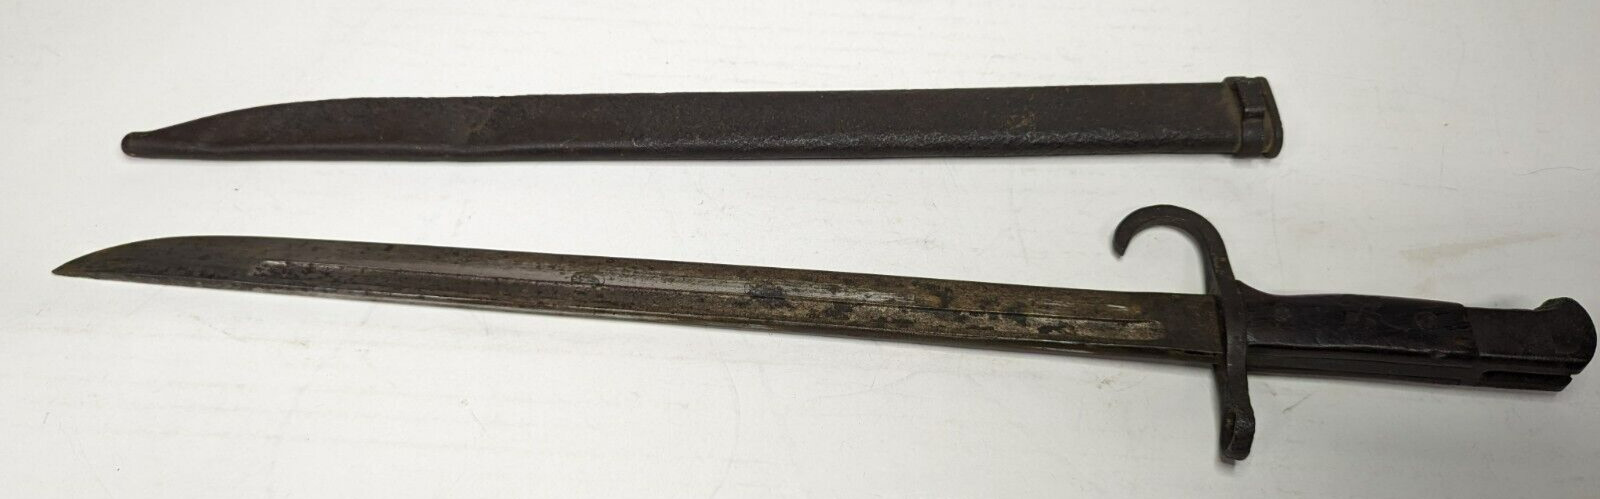 Used Antique Japanese WW2 Military Metal Bayonet & Scabbard